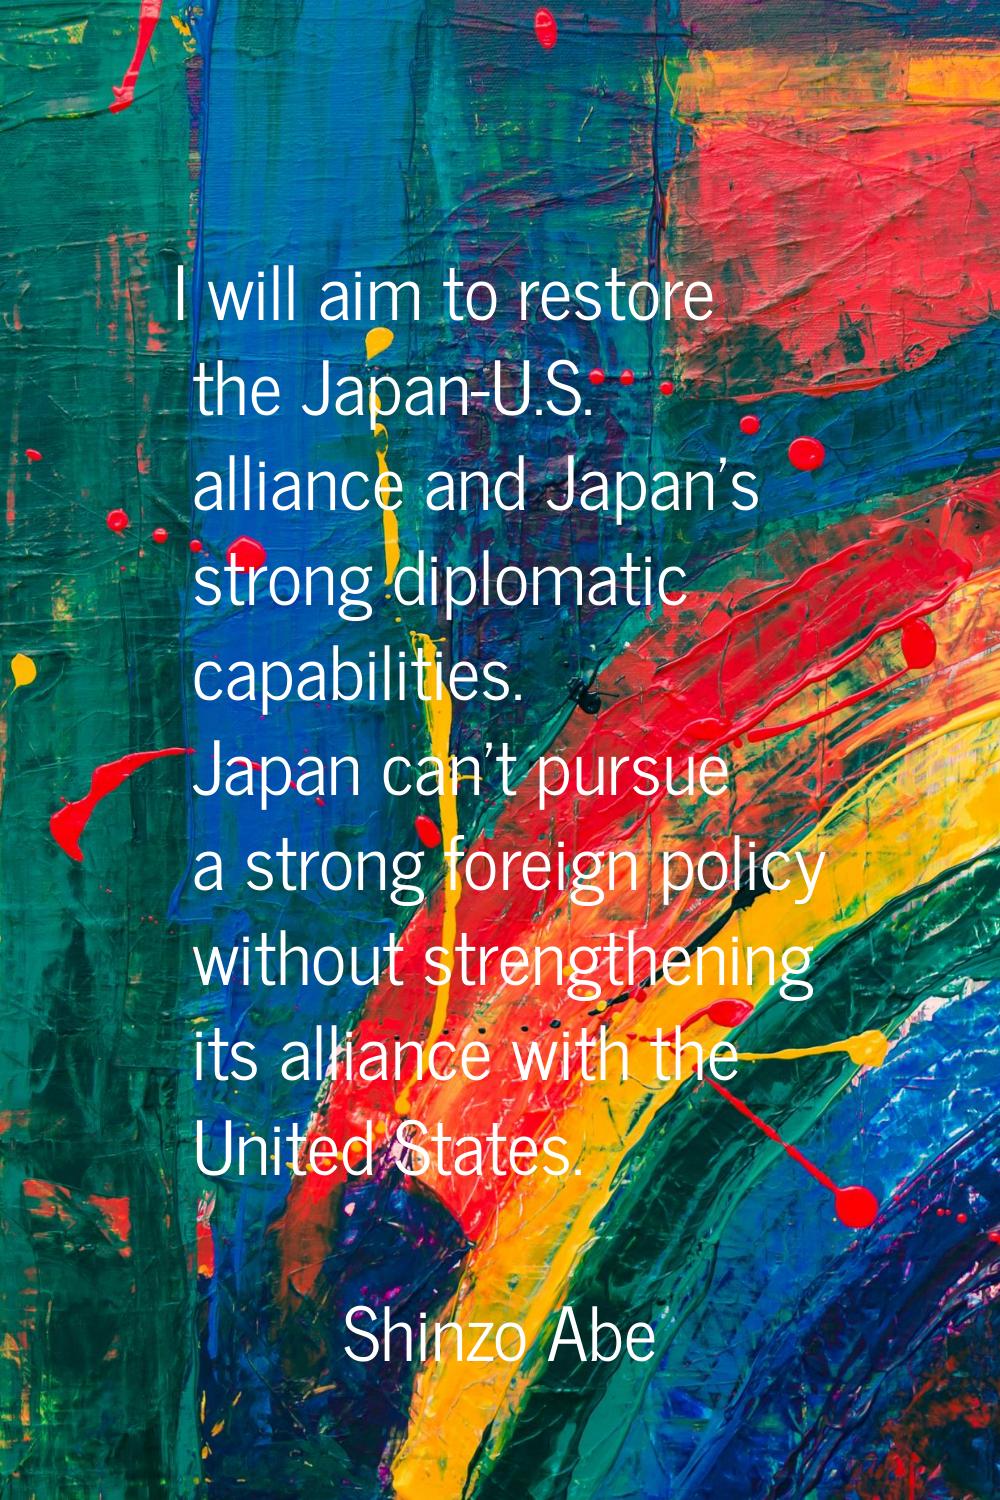 I will aim to restore the Japan-U.S. alliance and Japan's strong diplomatic capabilities. Japan can